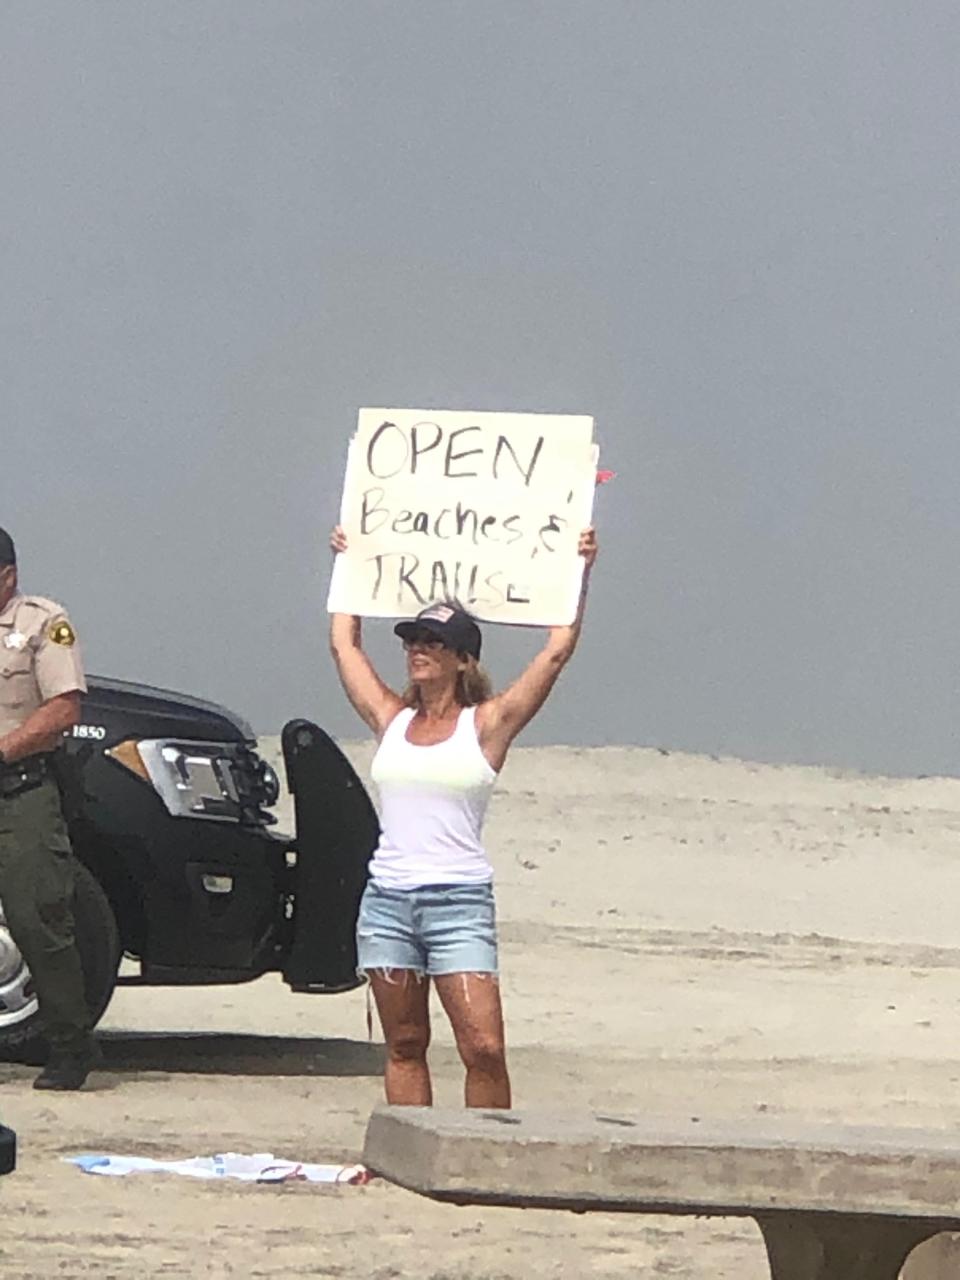 Crista Anne Curtis protests at Moonlight Beach in Encinitas, California, on Saturday, April 25.